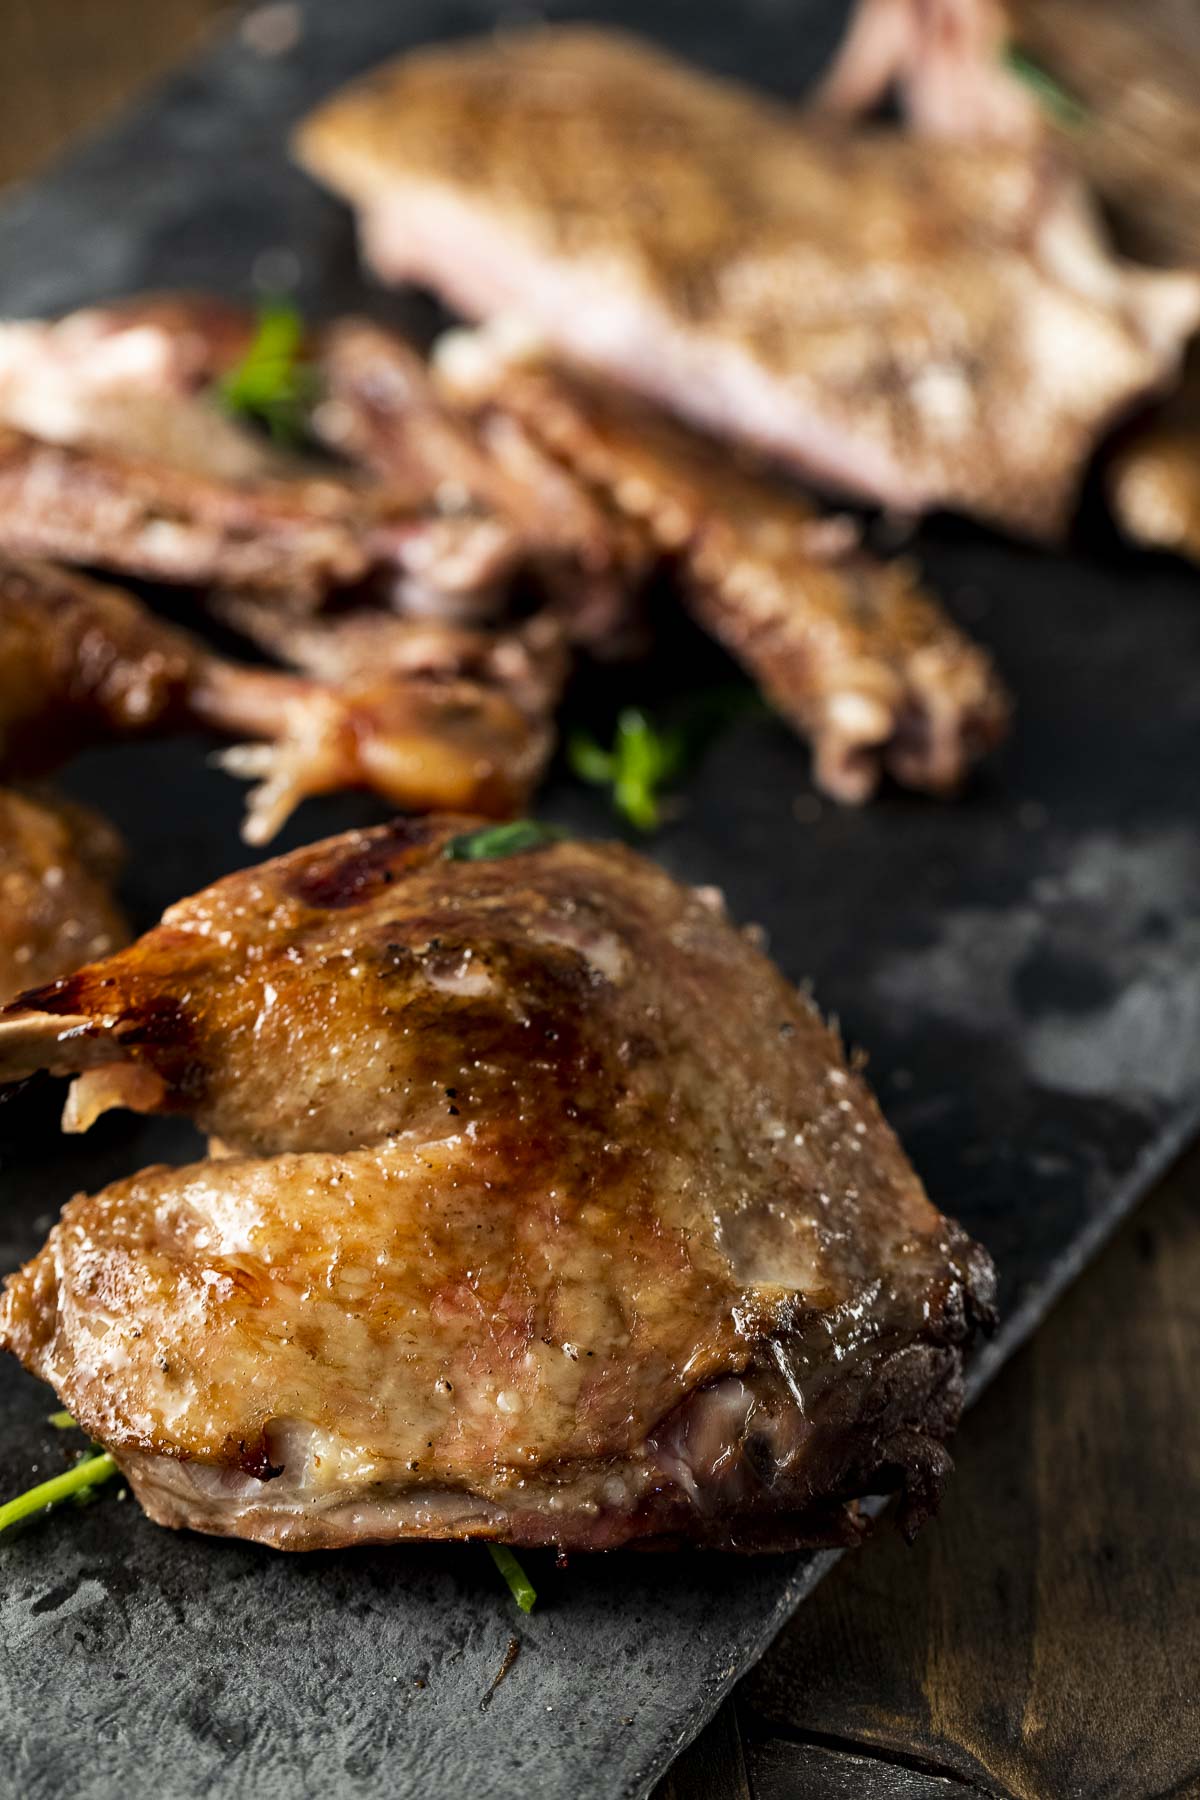 https://www.wenthere8this.com/wp-content/uploads/2021/12/sous-vide-whole-duck-5.jpg